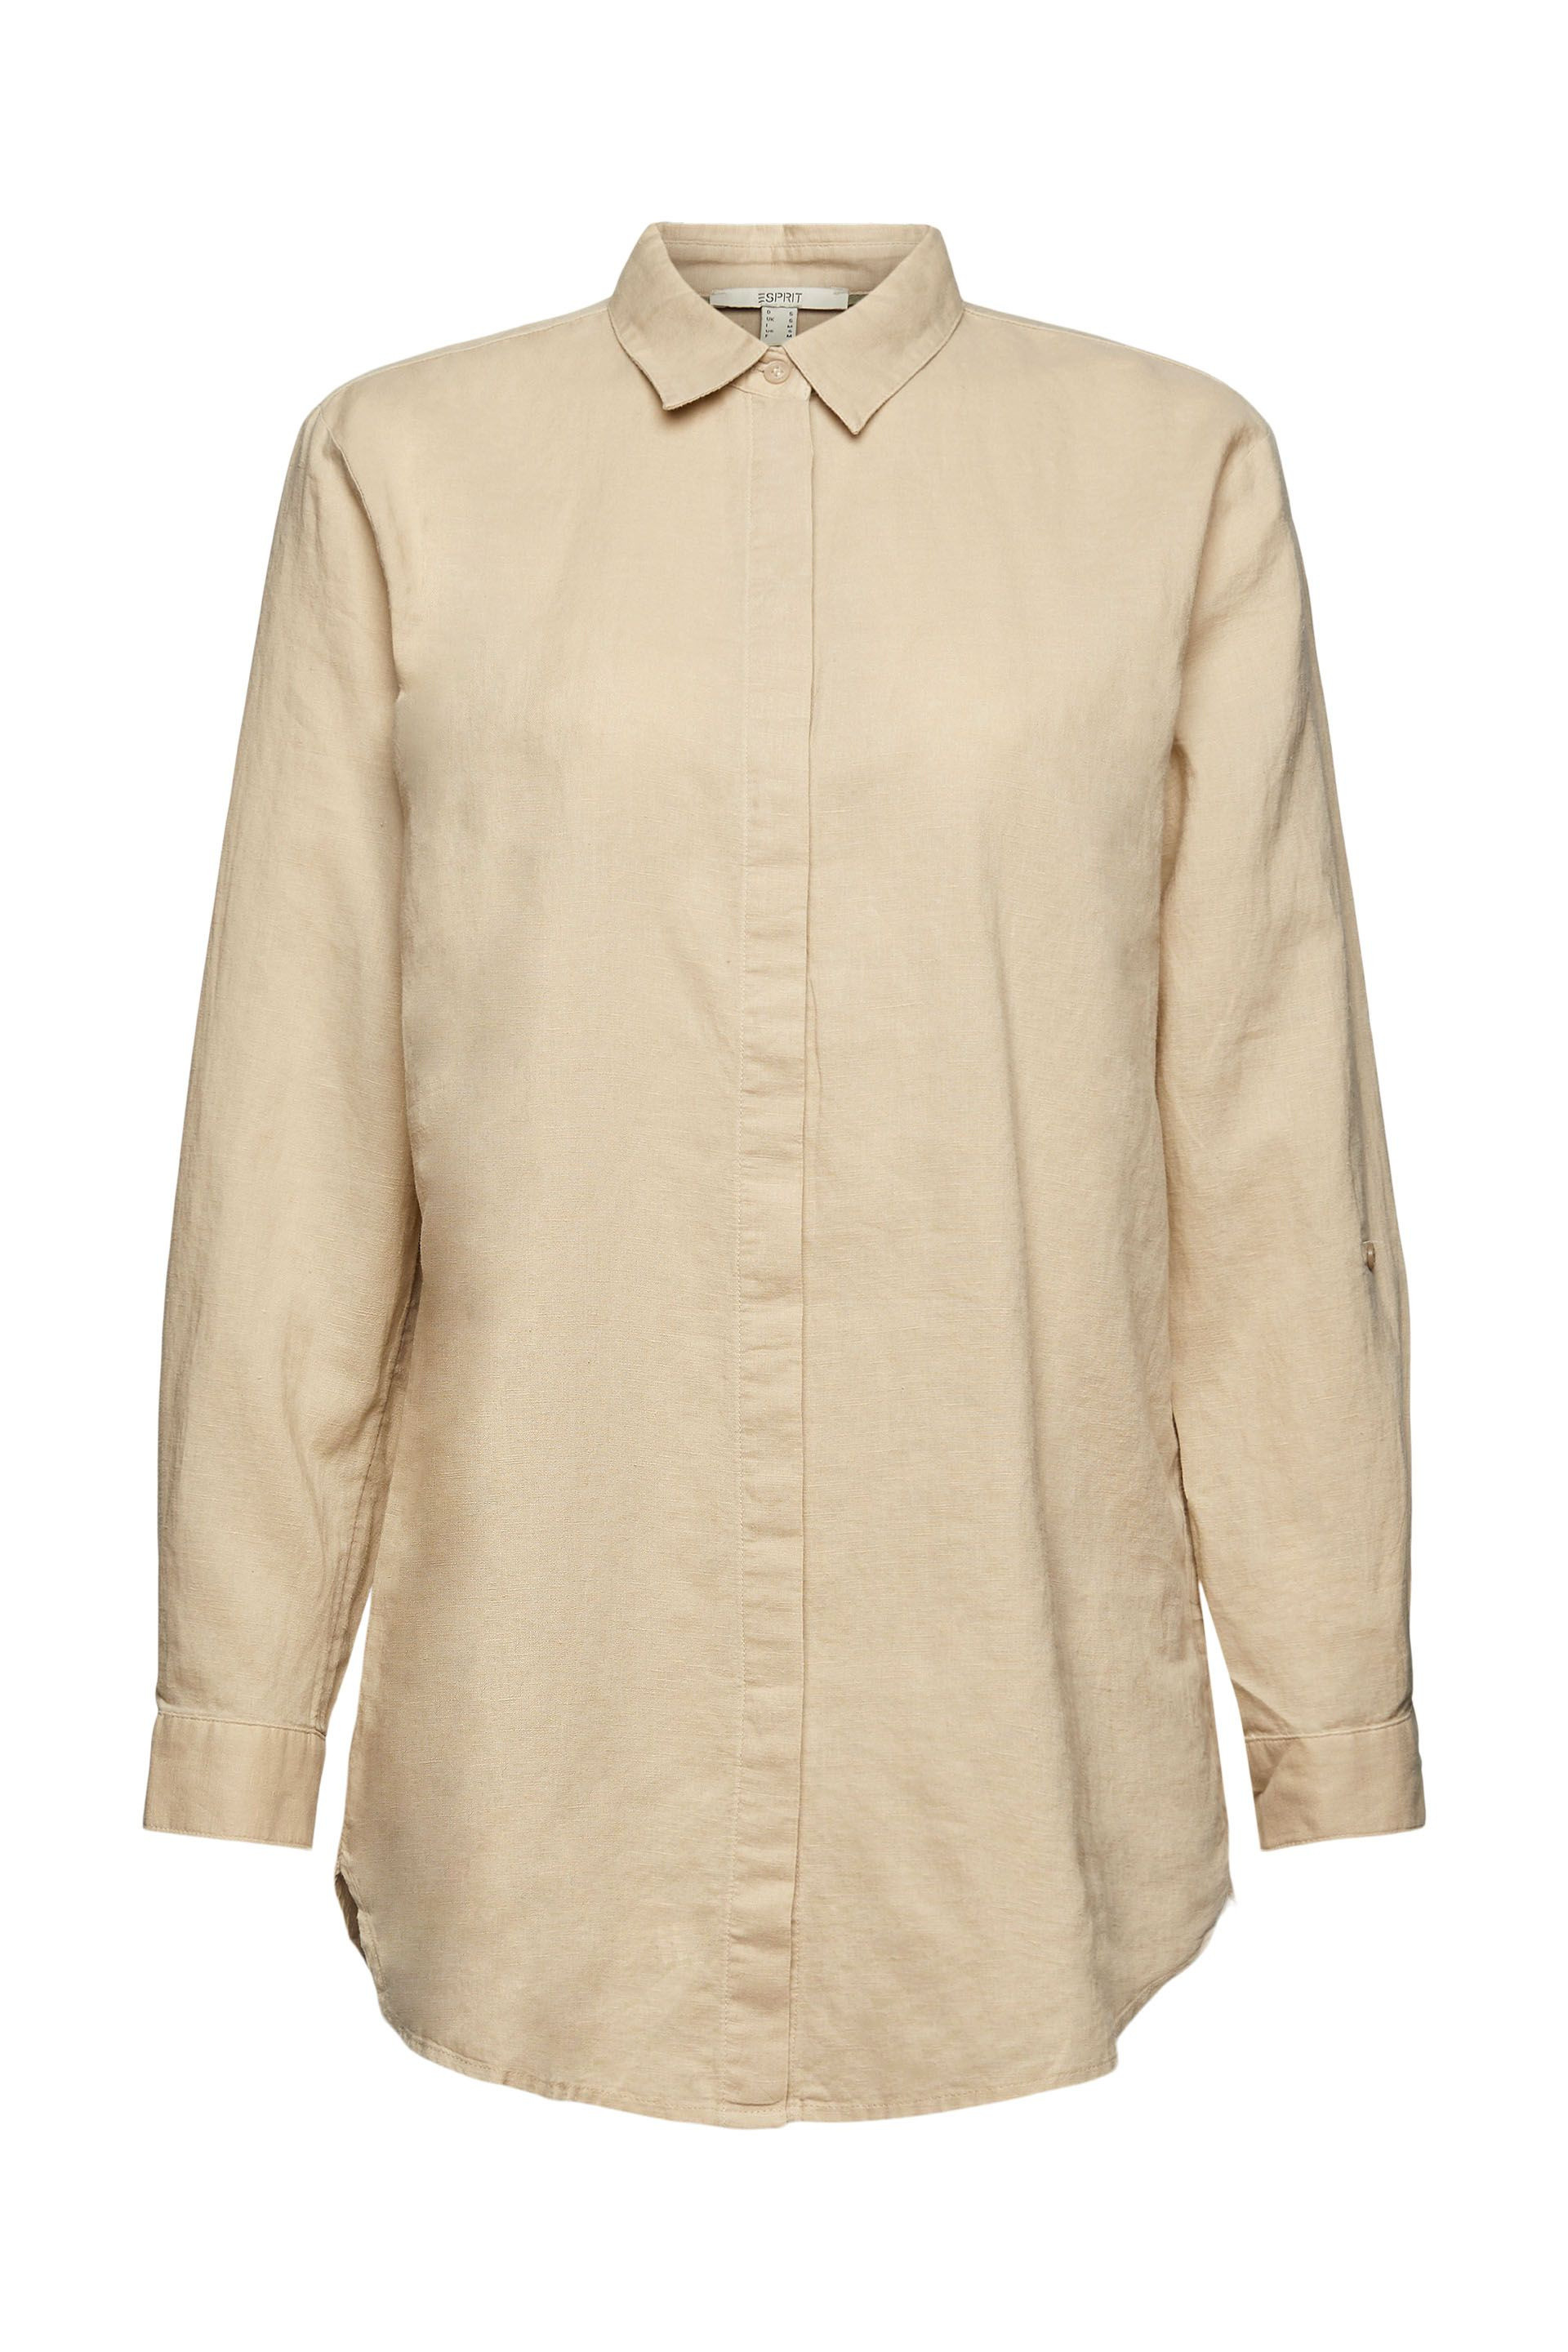 Camicia in misto lino, Beige, large image number 0